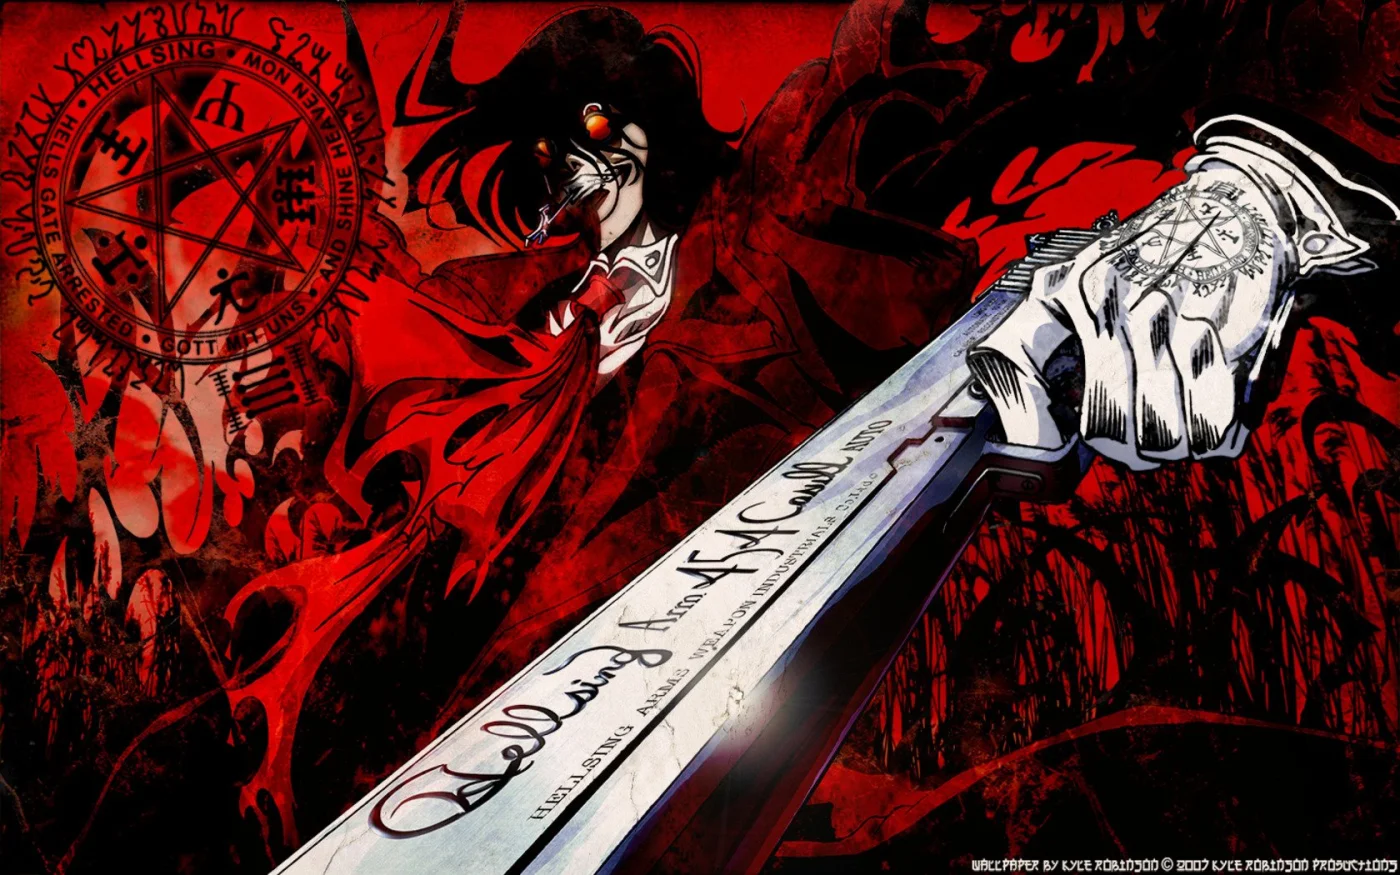 FEATURE: The Original Hellsing Anime is a Slow Burn That's Worth